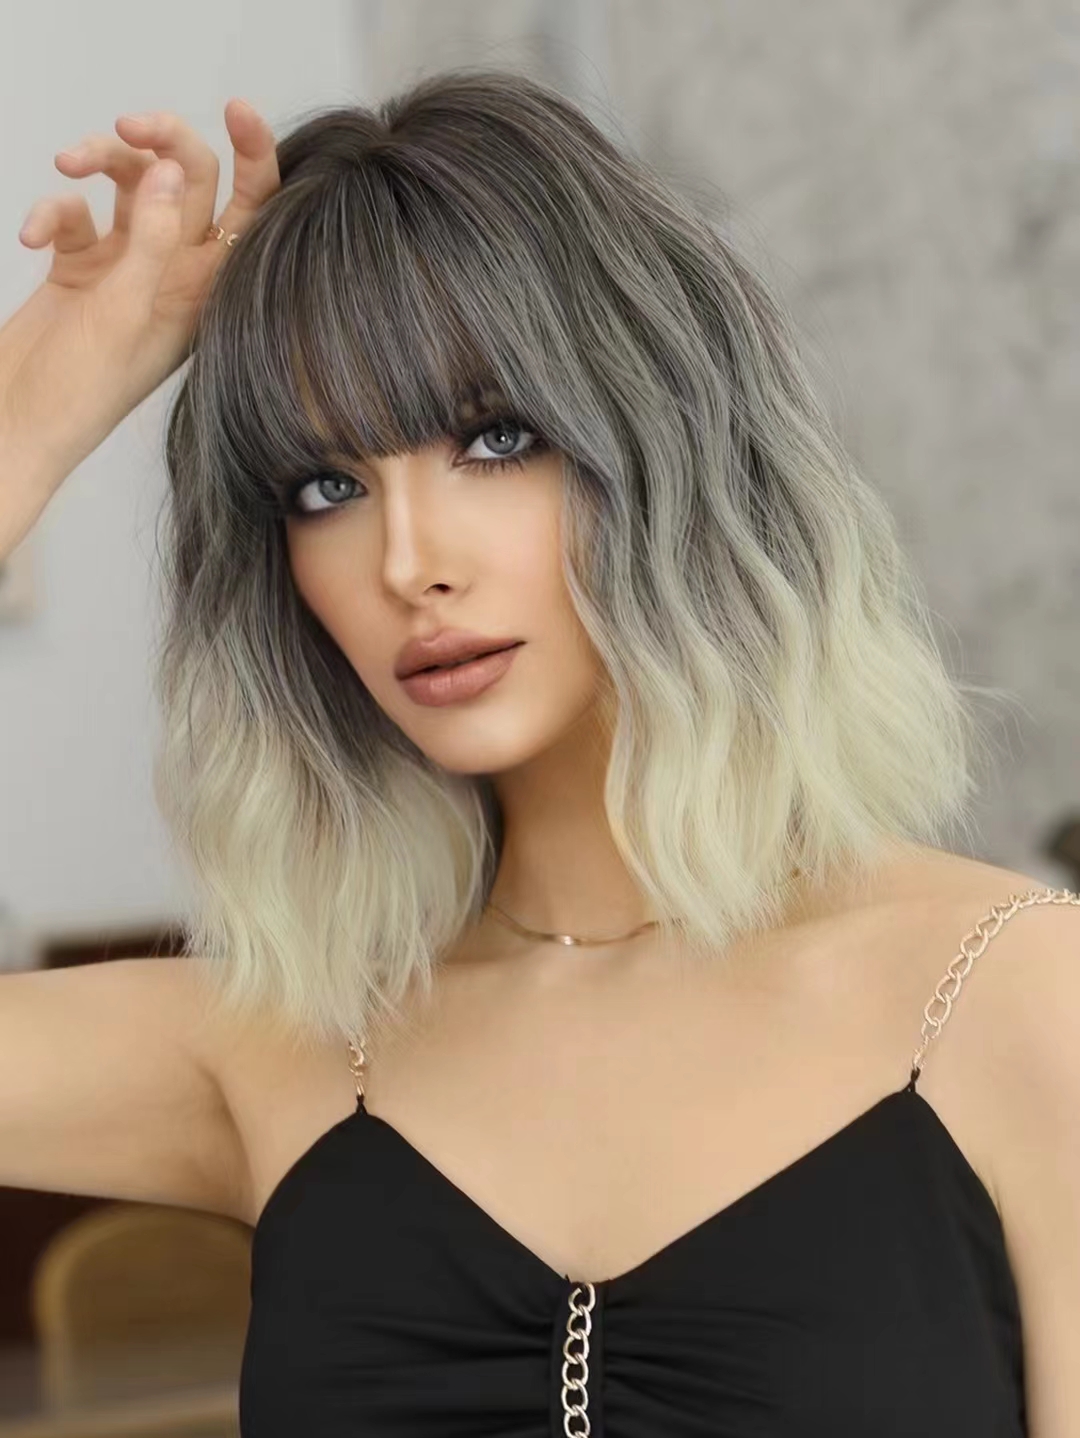 Fashionable synthetic wig from Yinraohai, featuring women's short wavy silver-white hair with dyed Japanese and Korean bangs, gradient effect, ready to go